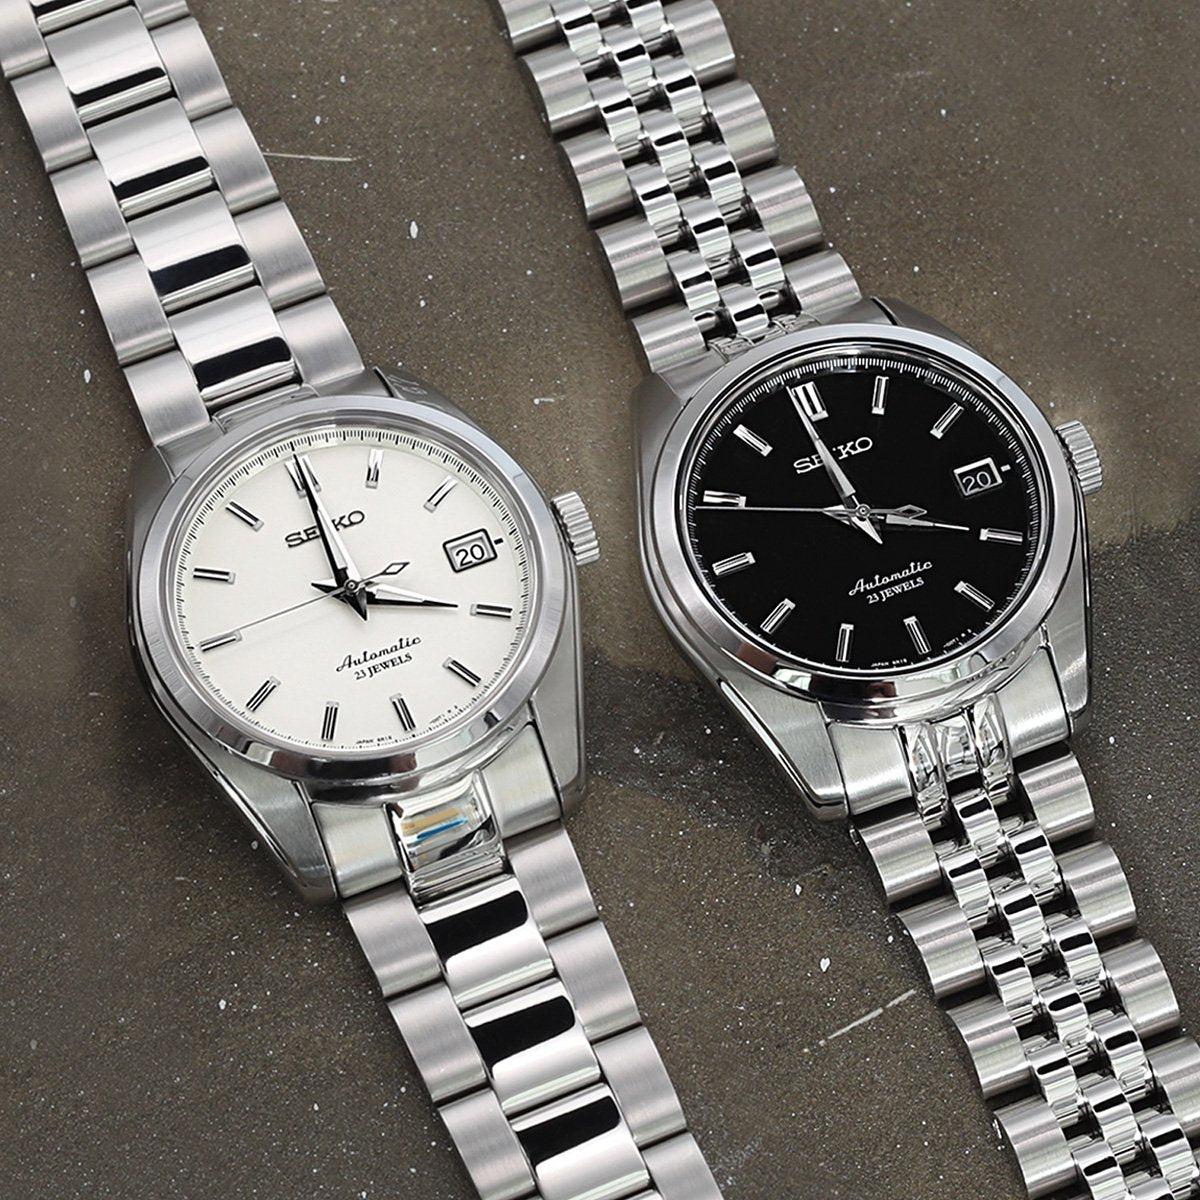 The Best Possible Set Up For Your Seiko SARB033 and SARB035 Watch! |  Strapcode